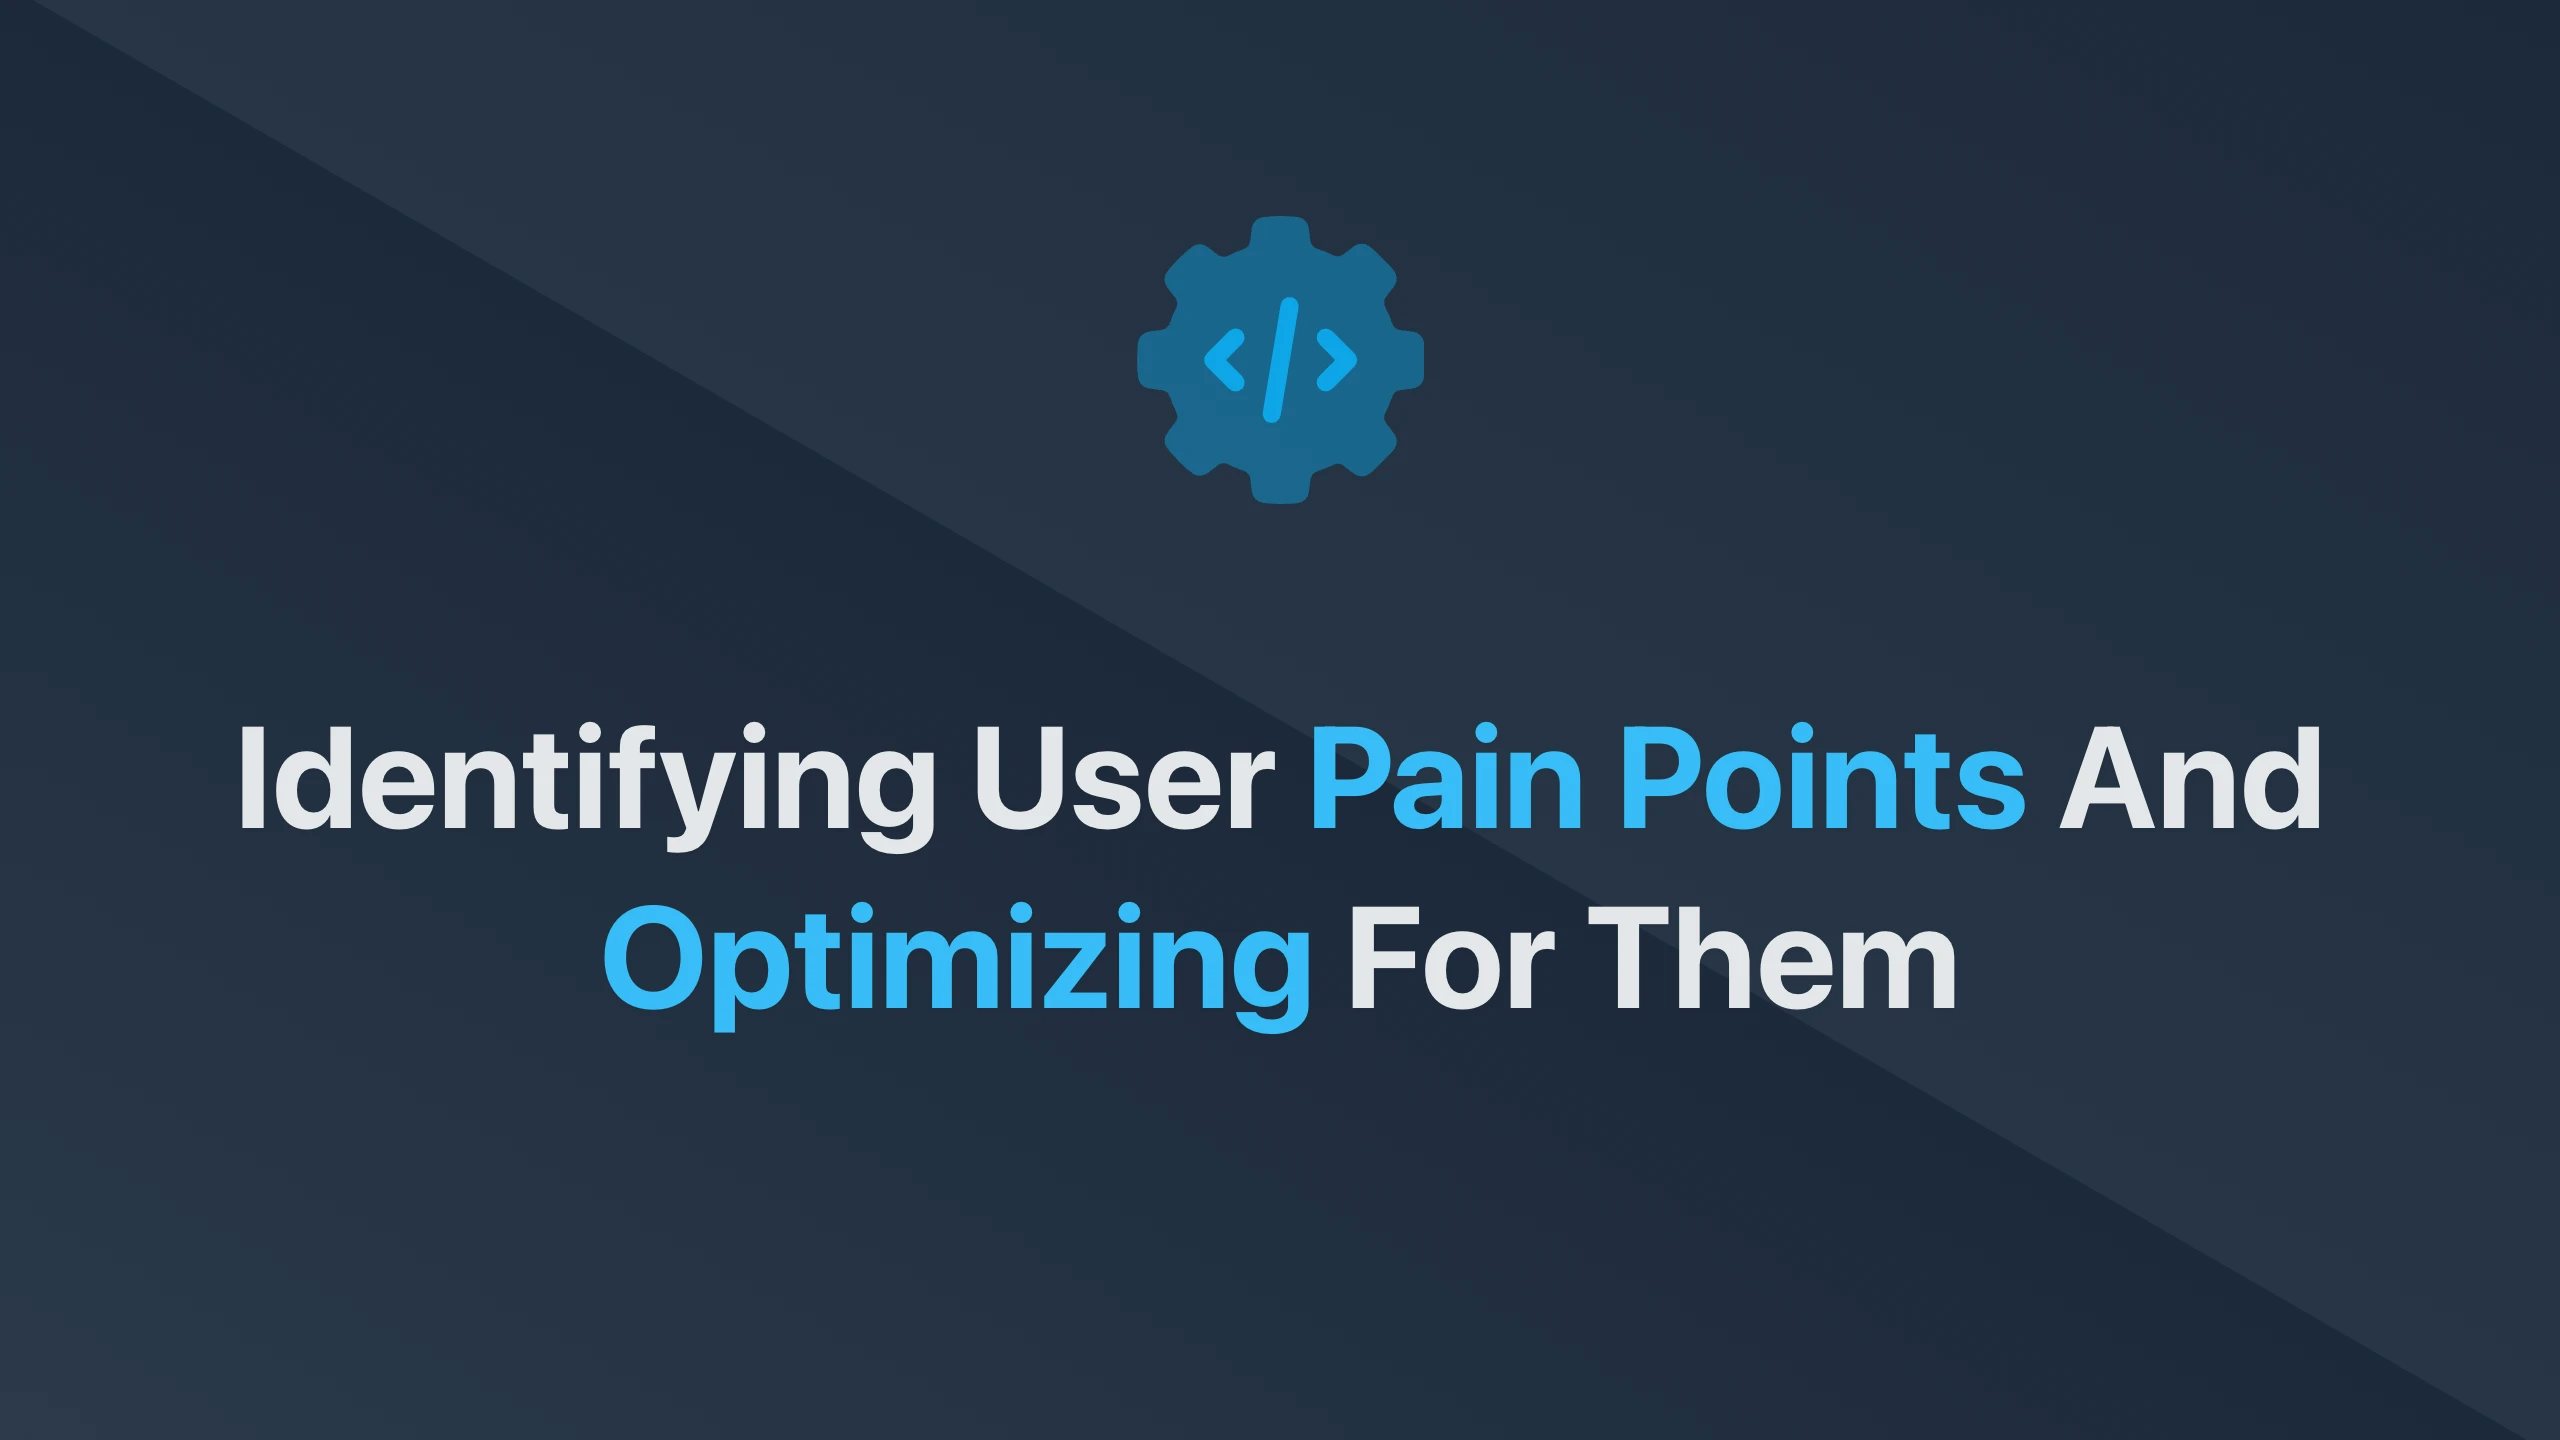 Cover Image for Identifying User Pain Points and Optimizing for Them